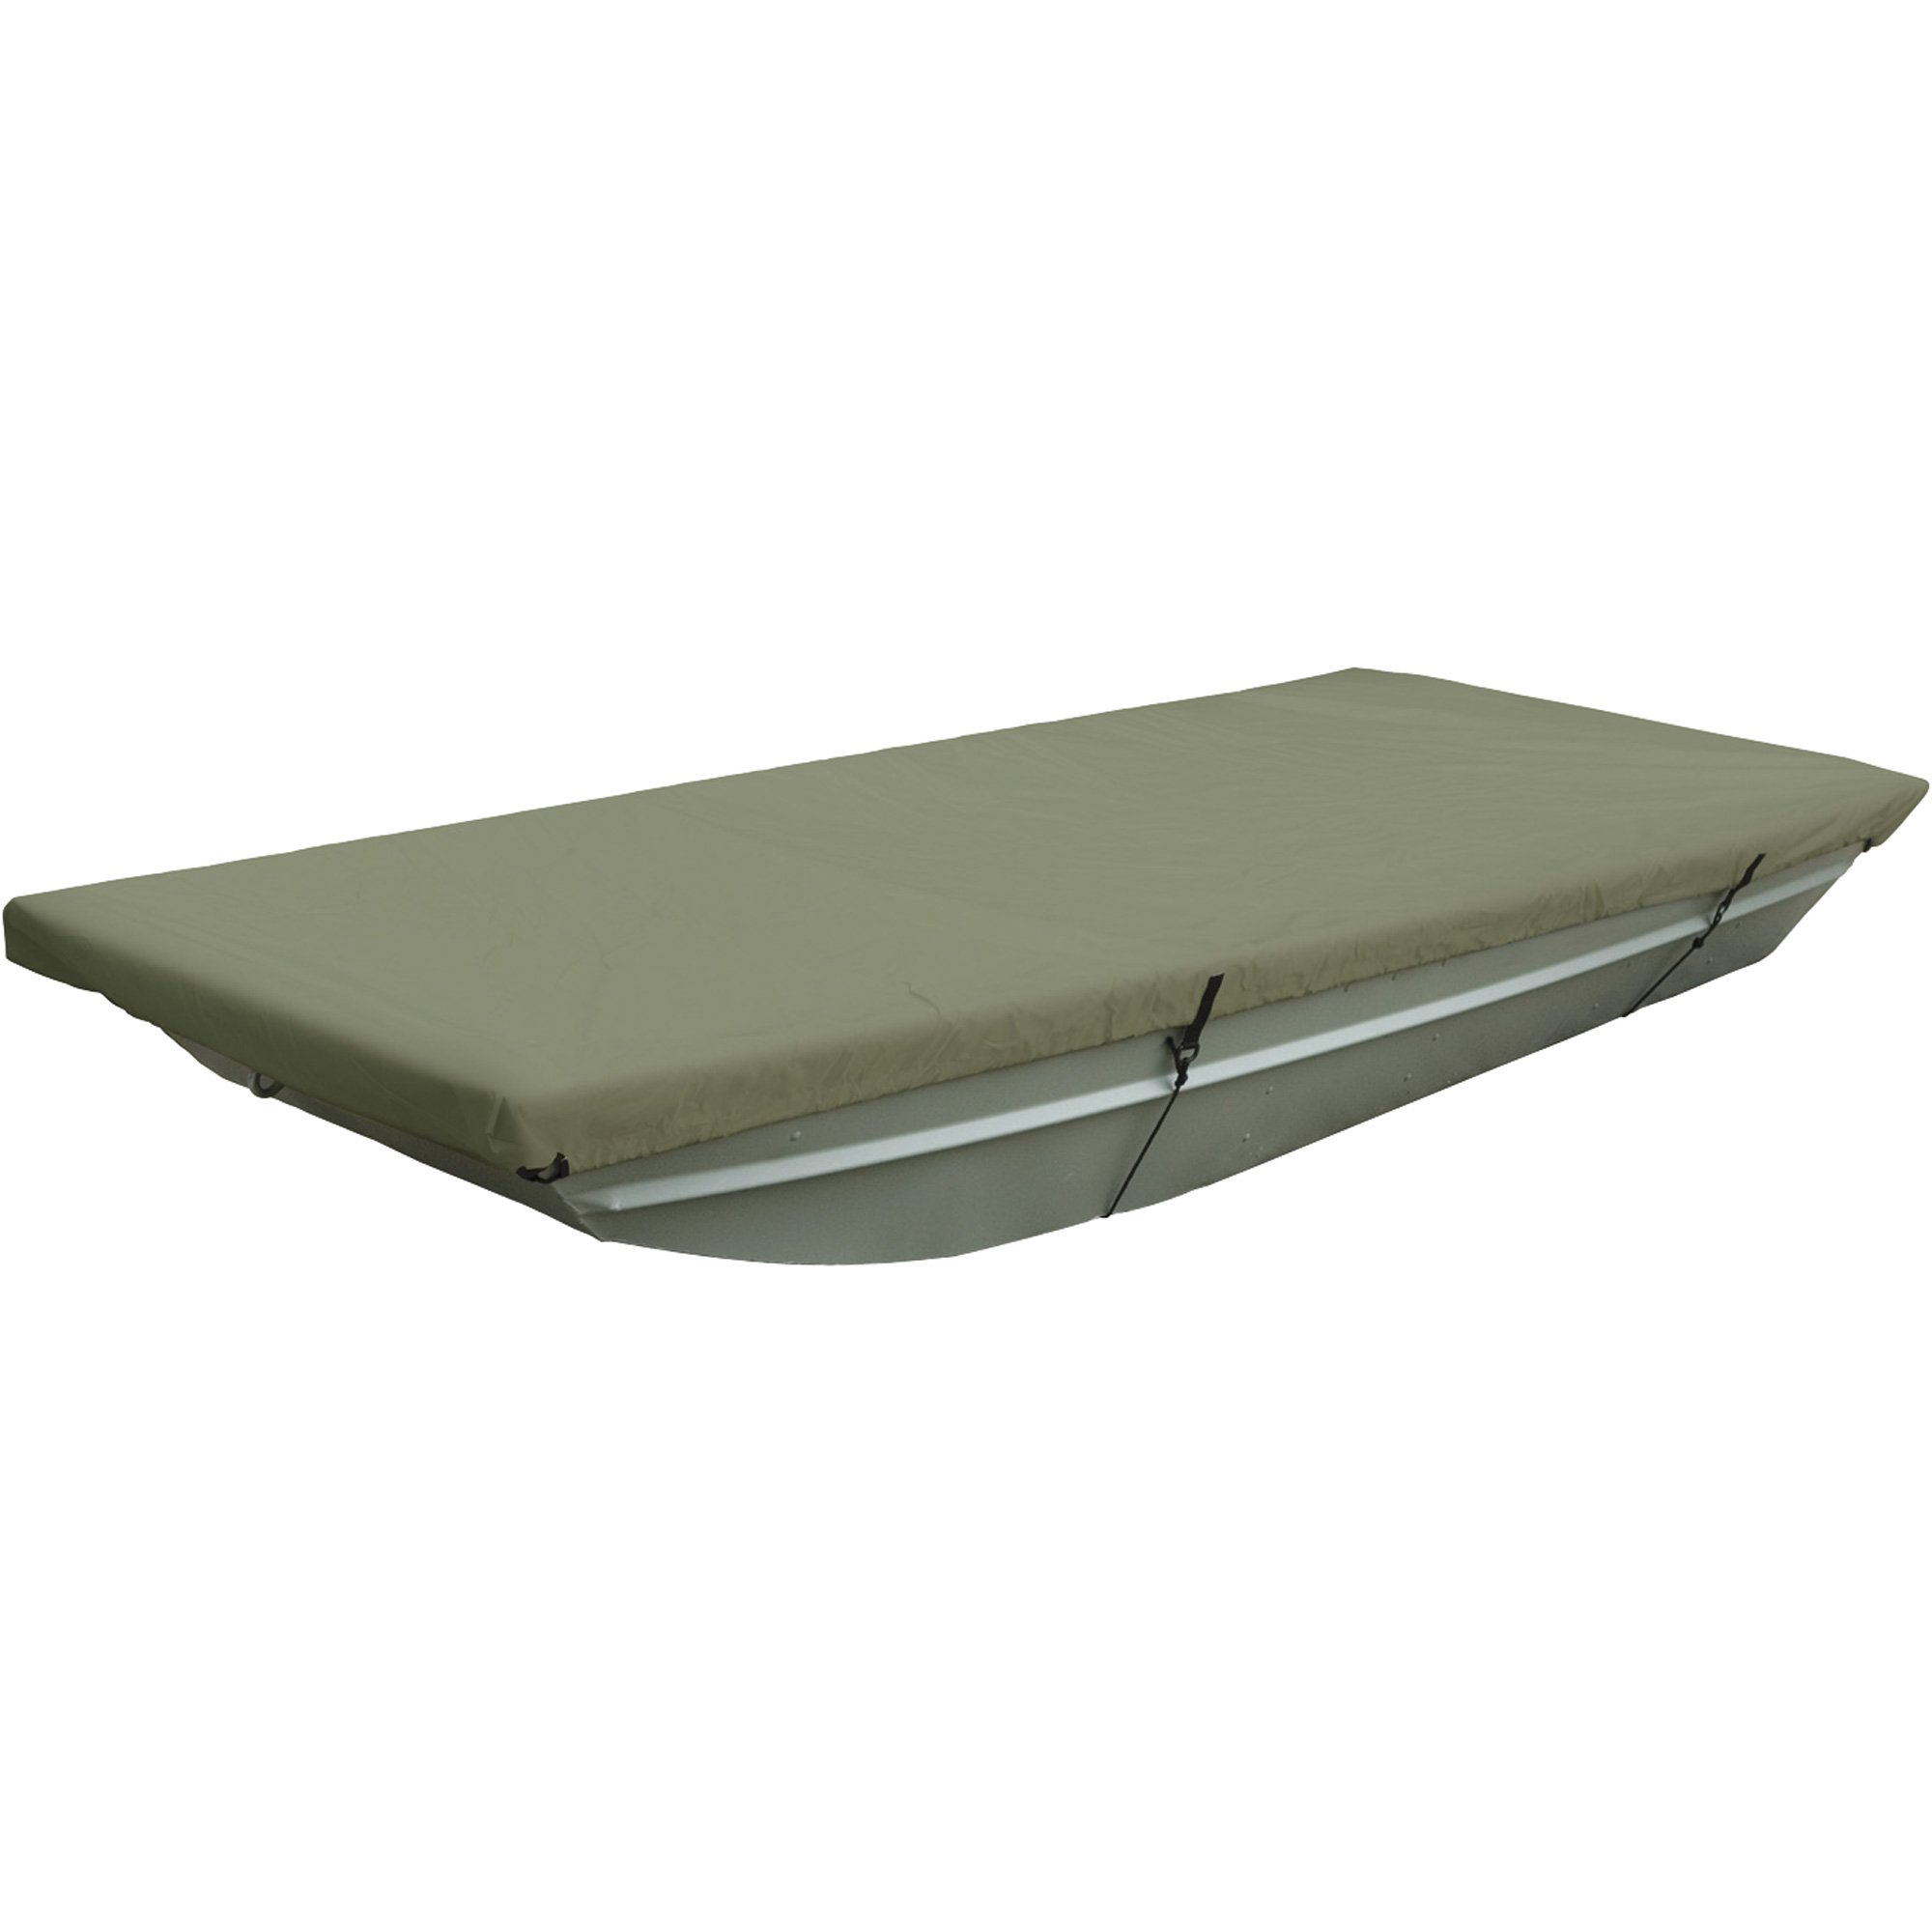 Classic Accessories Jon Boat Cover — Up to 12Ft., Olive, Model